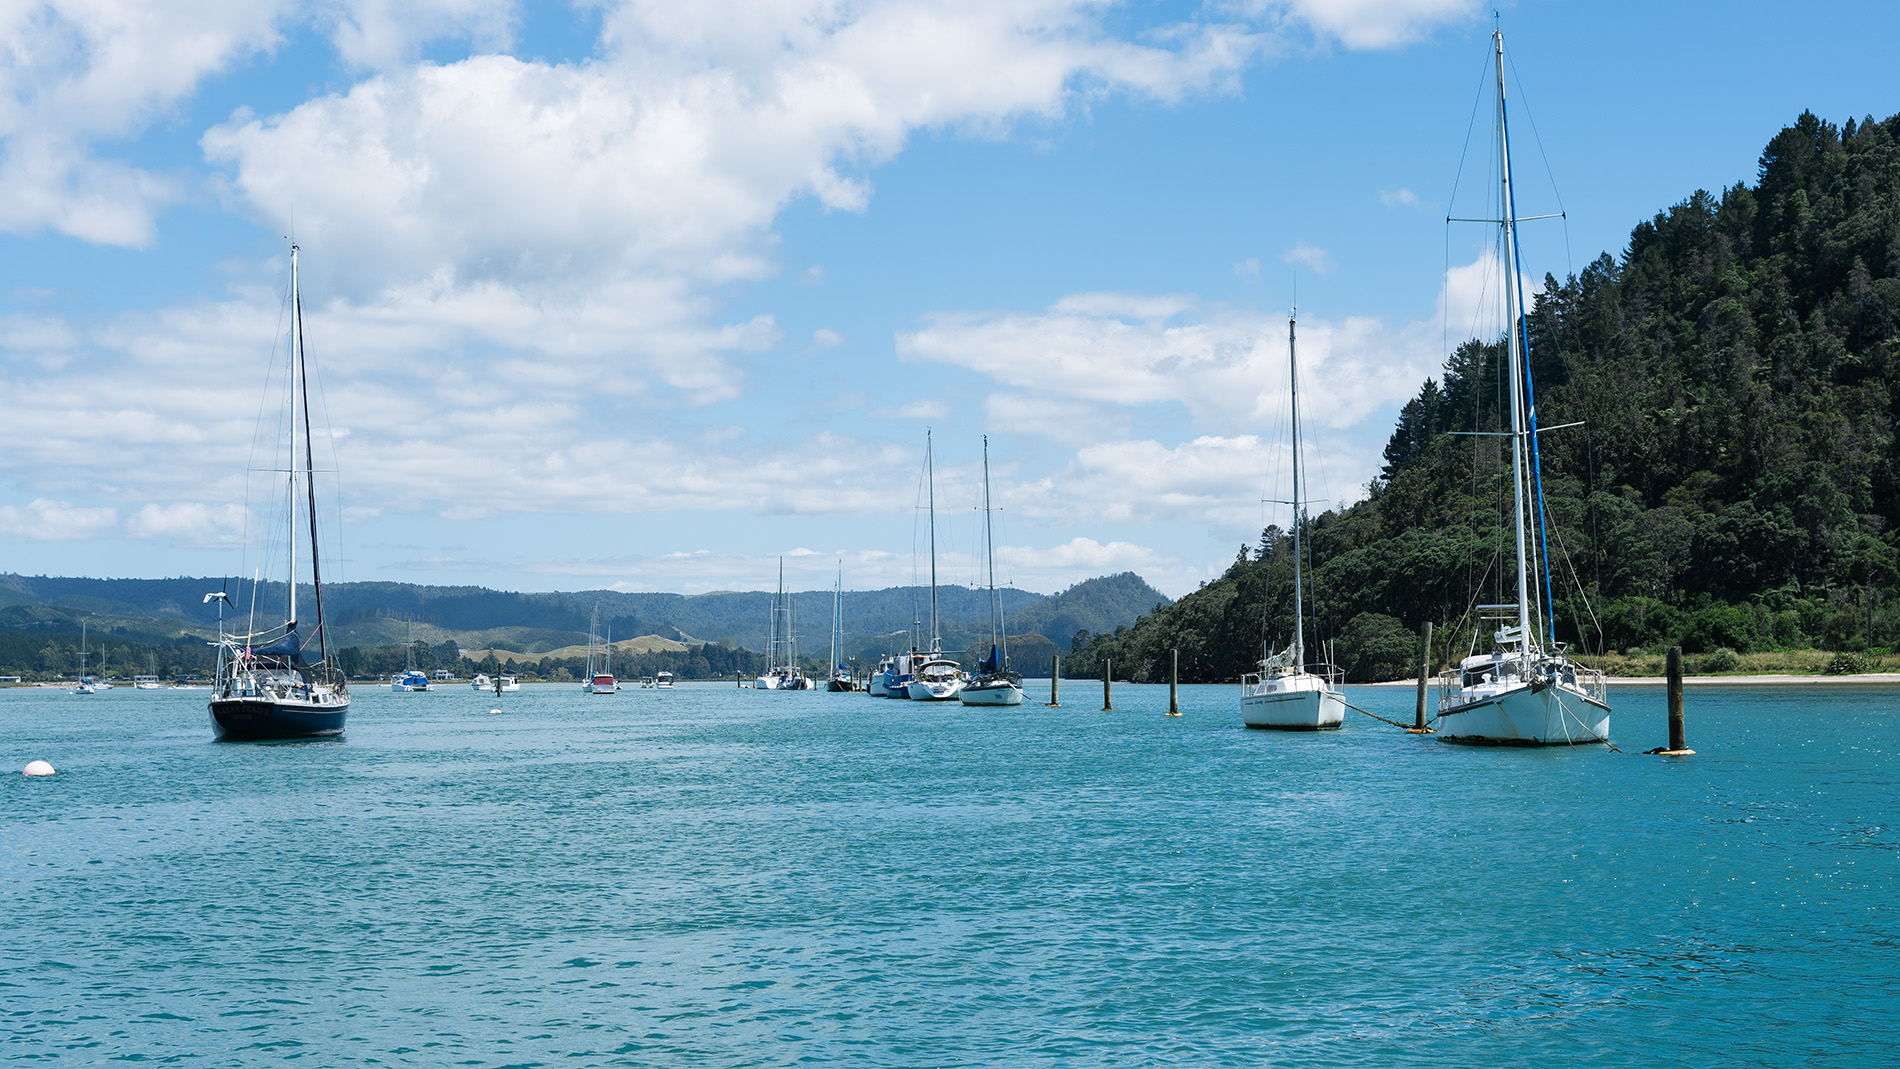 Image - Pole moorings and boats in Whangamata Harbour